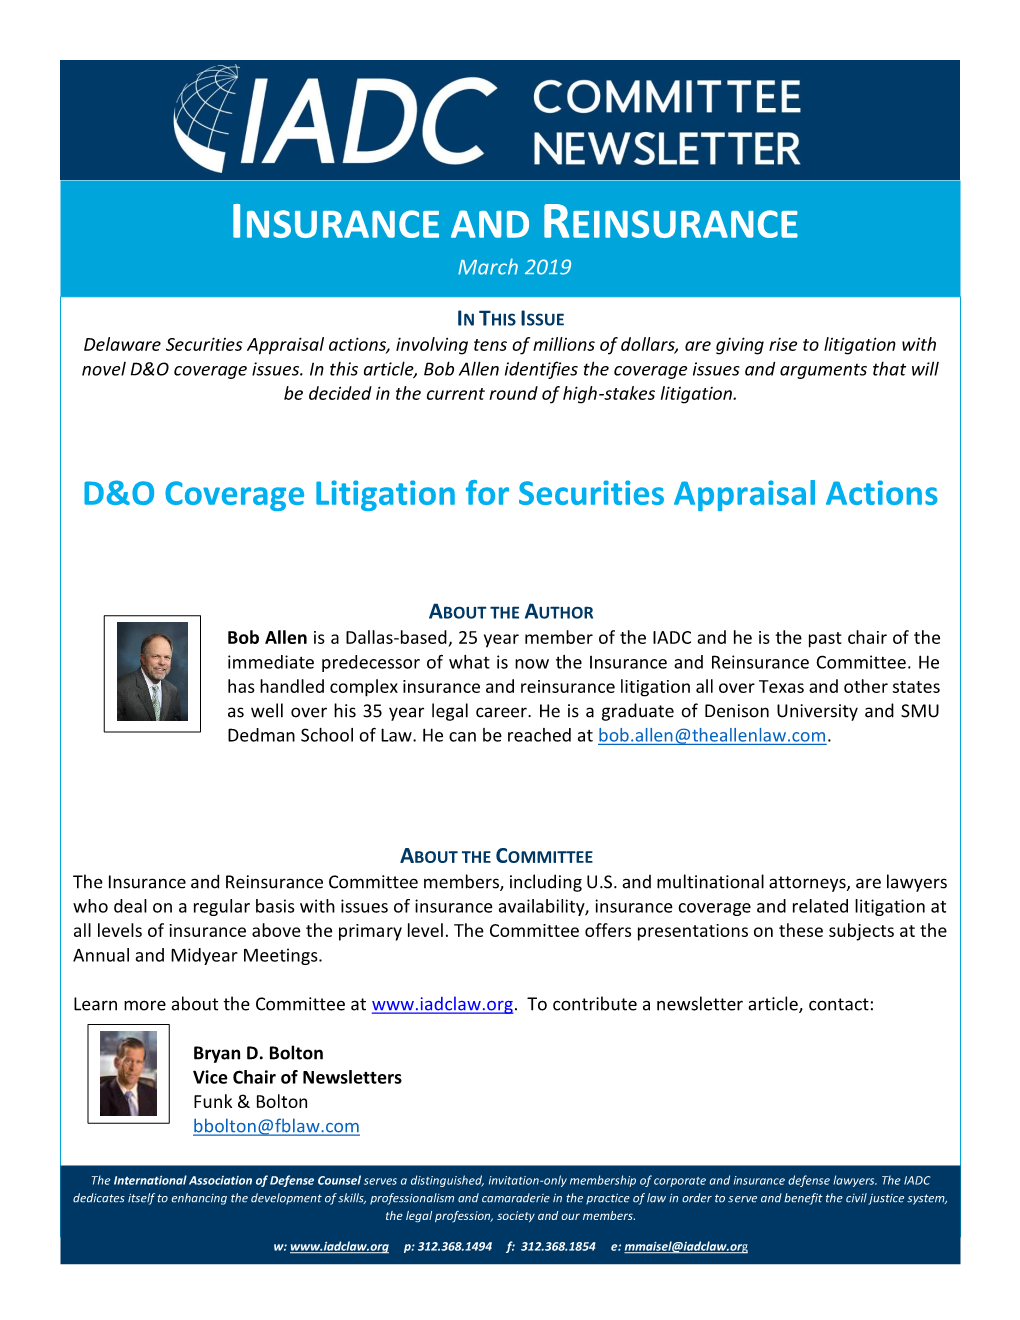 D&O Coverage Litigation for Securities